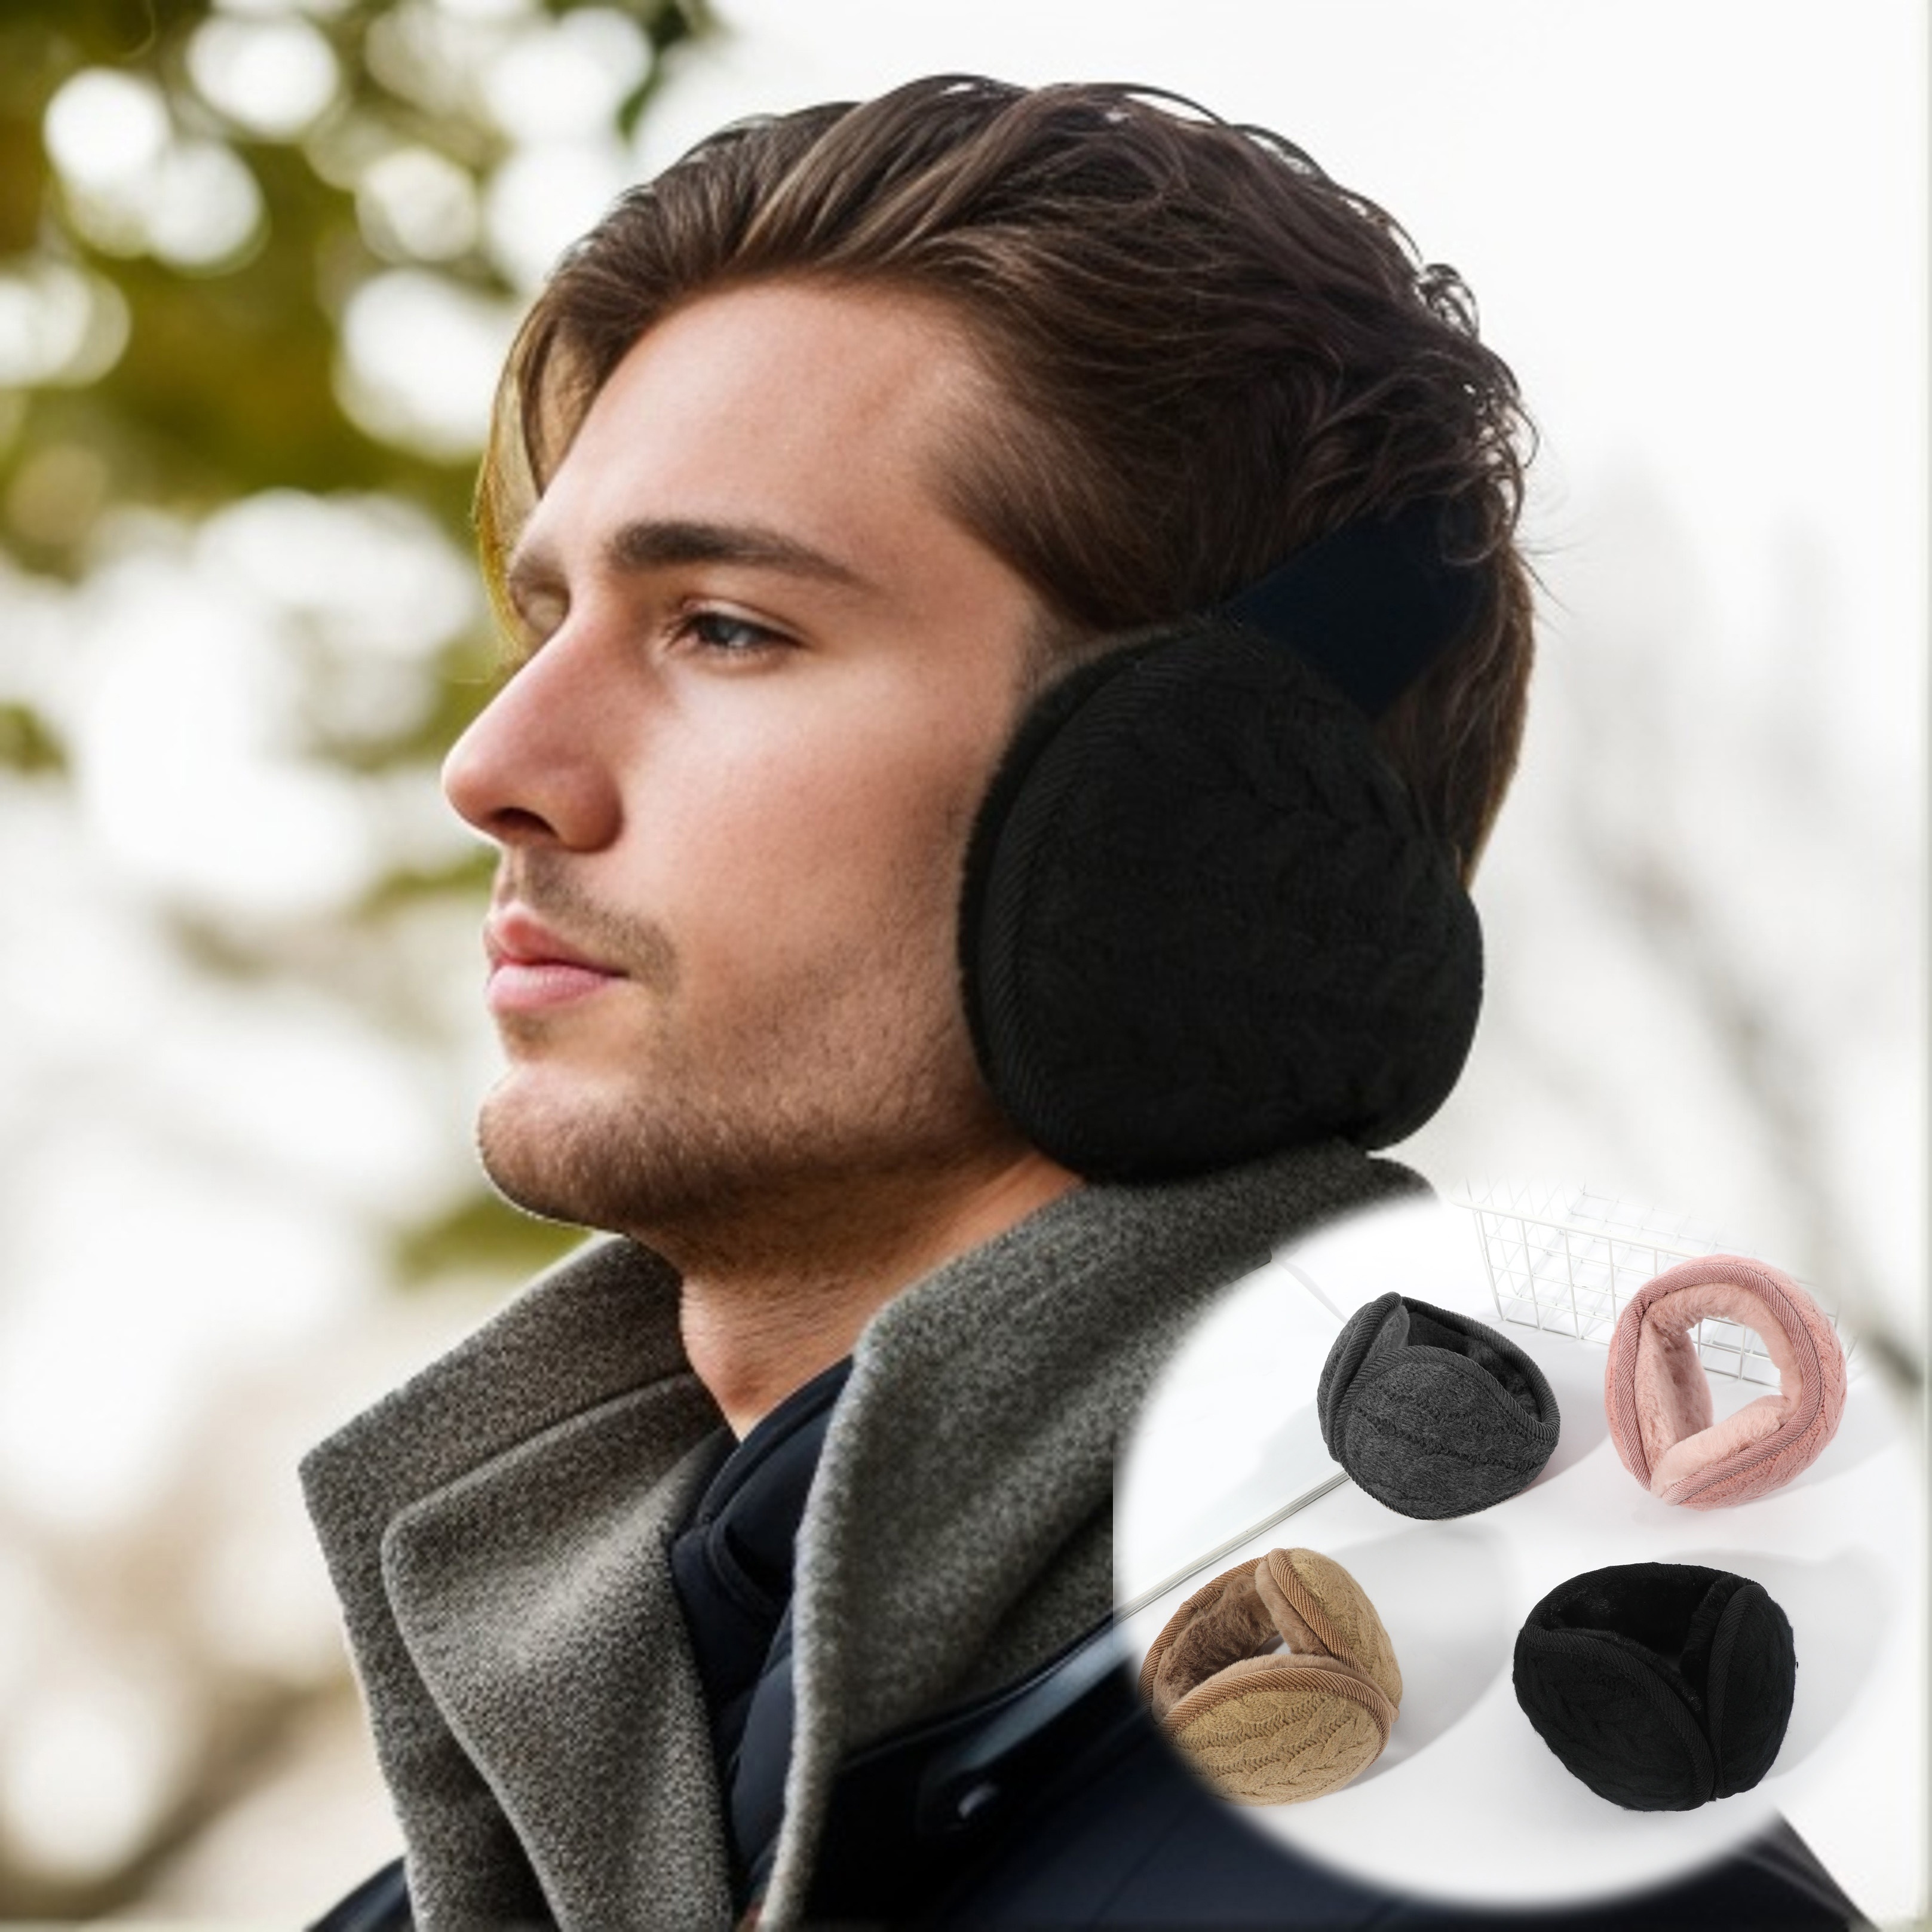 Winter Plush Earmuffs Outdoor Riding Skiing Warm Warm Earmuffs Protective  Ear Cover For Men And Women, Free Shipping On Items Shipped From Temu